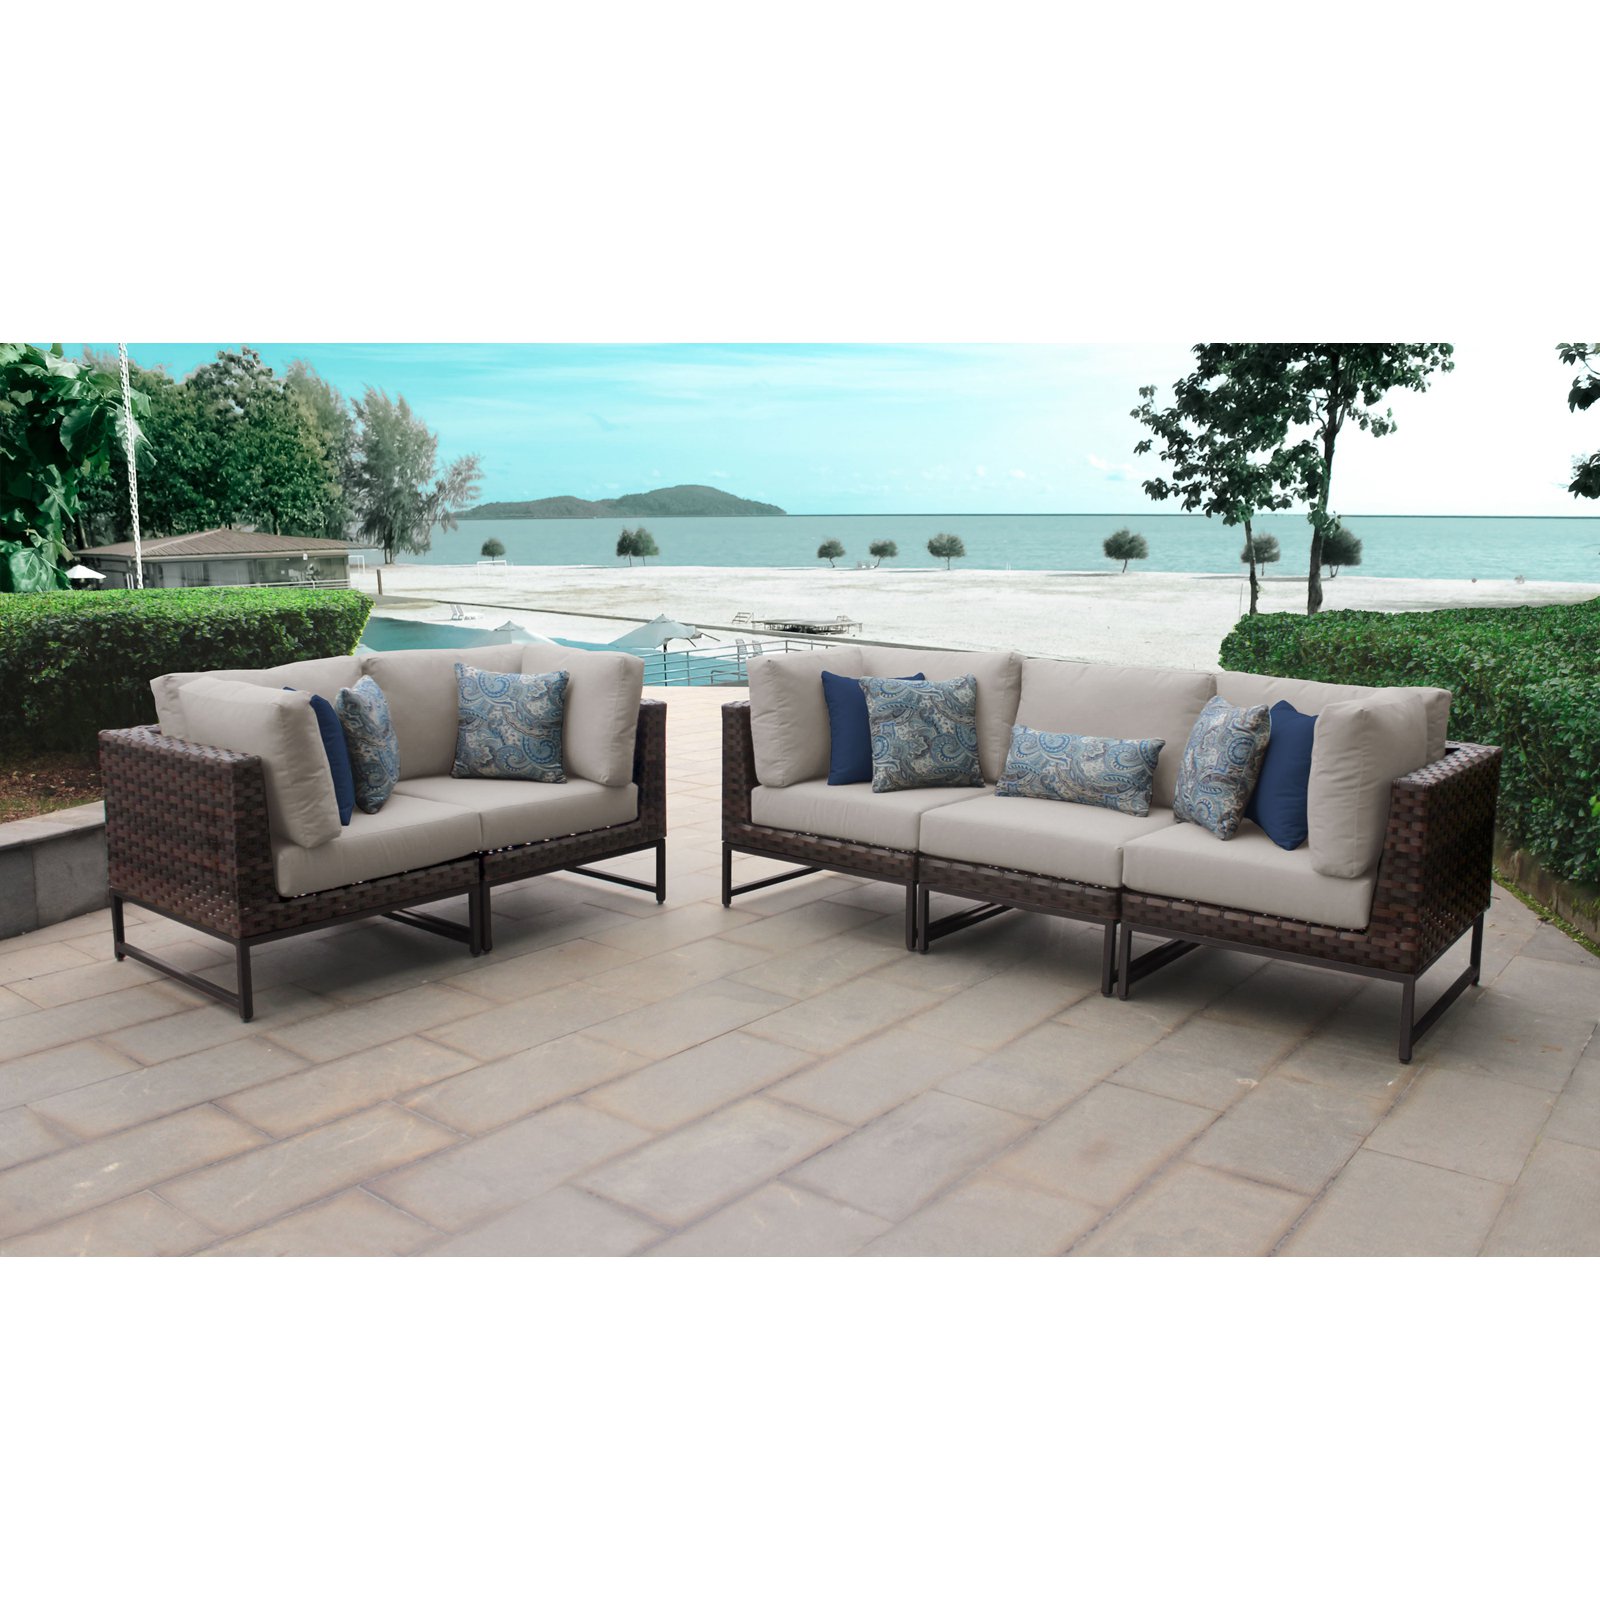 AMALFI 5 Piece Wicker Patio Furniture Set 05a in Gold and Cilantro - image 3 of 11